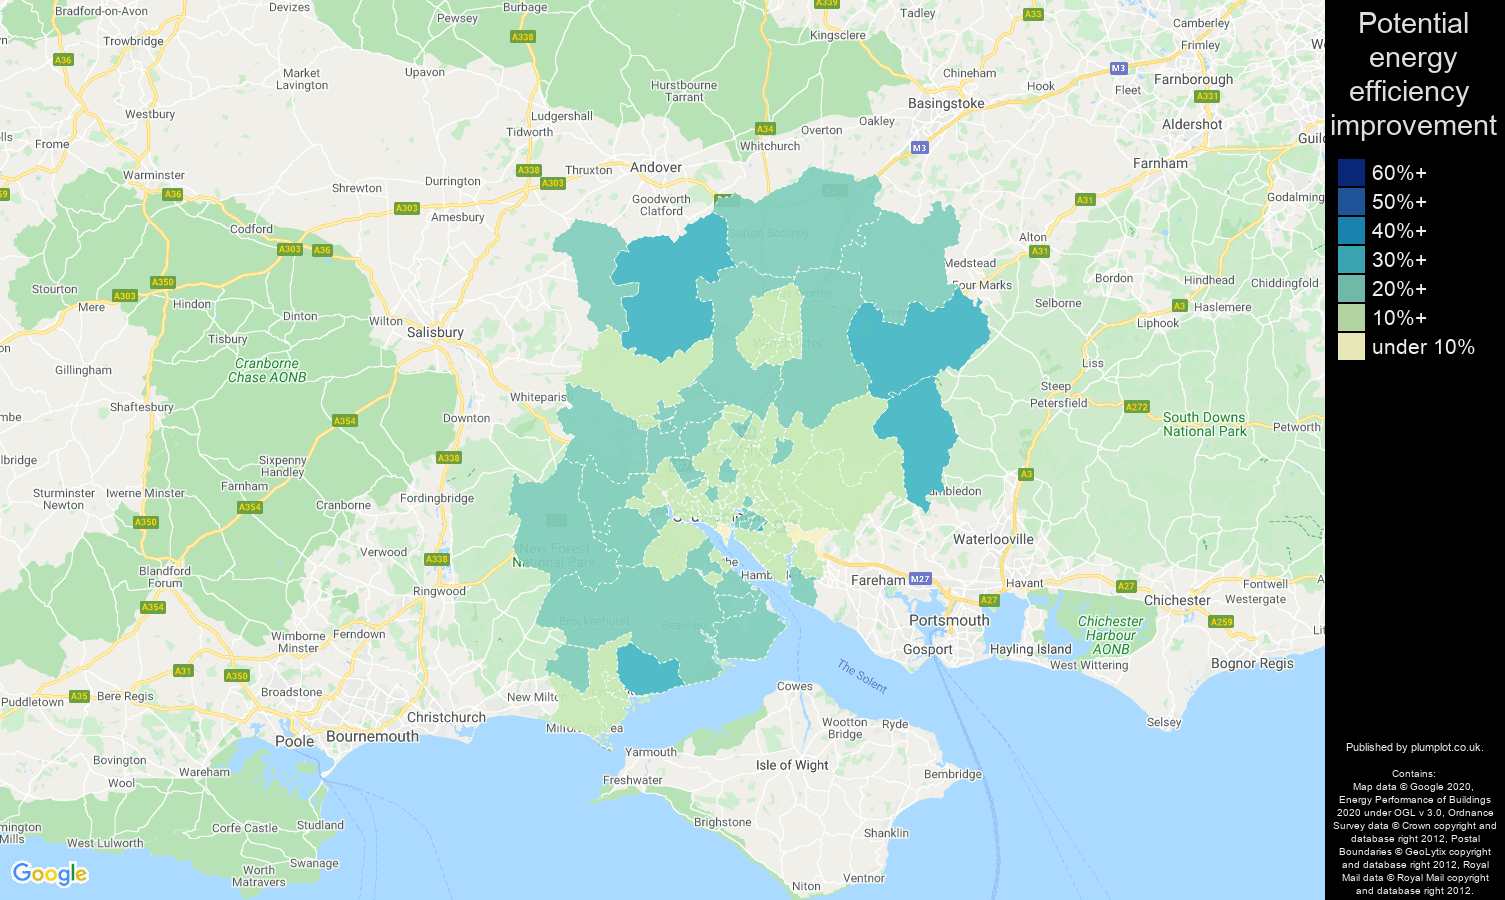 Southampton map of potential energy efficiency improvement of properties